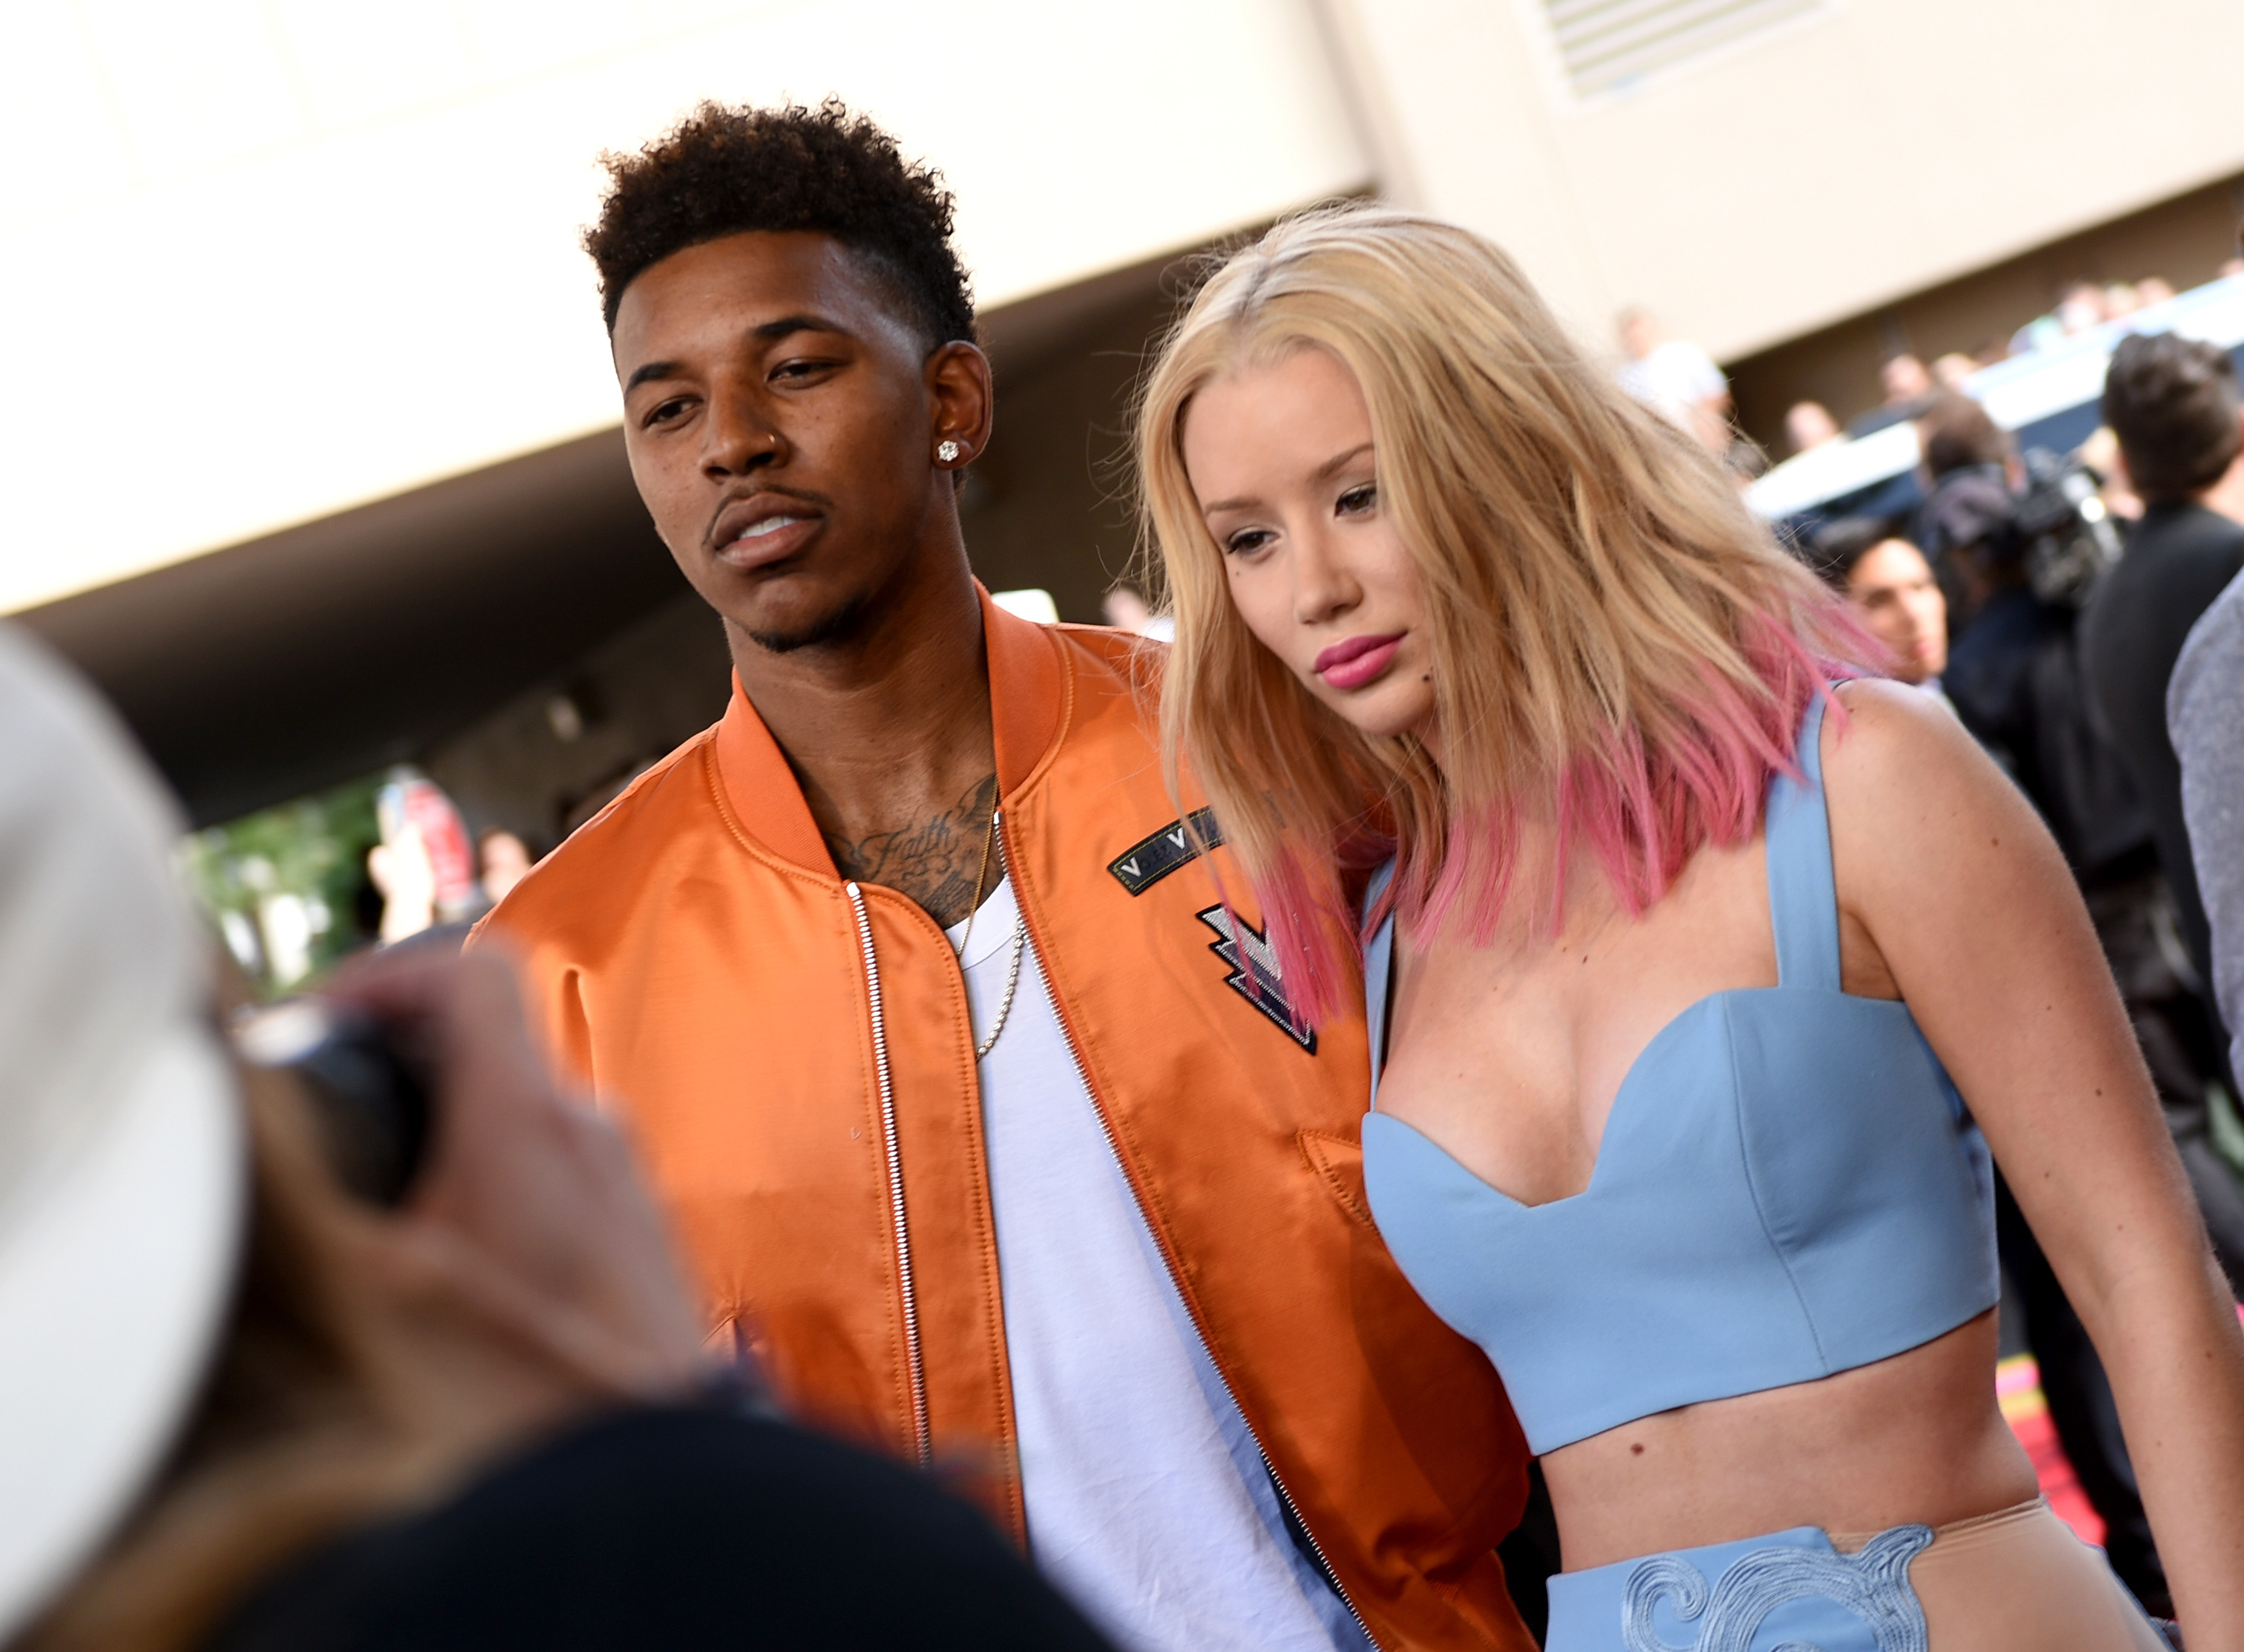 Nick Young and Iggy Azalea at the 2015 Billboard Music Awards on May 17, 2015, in Las Vegas, Nevada. | Source: Getty Images